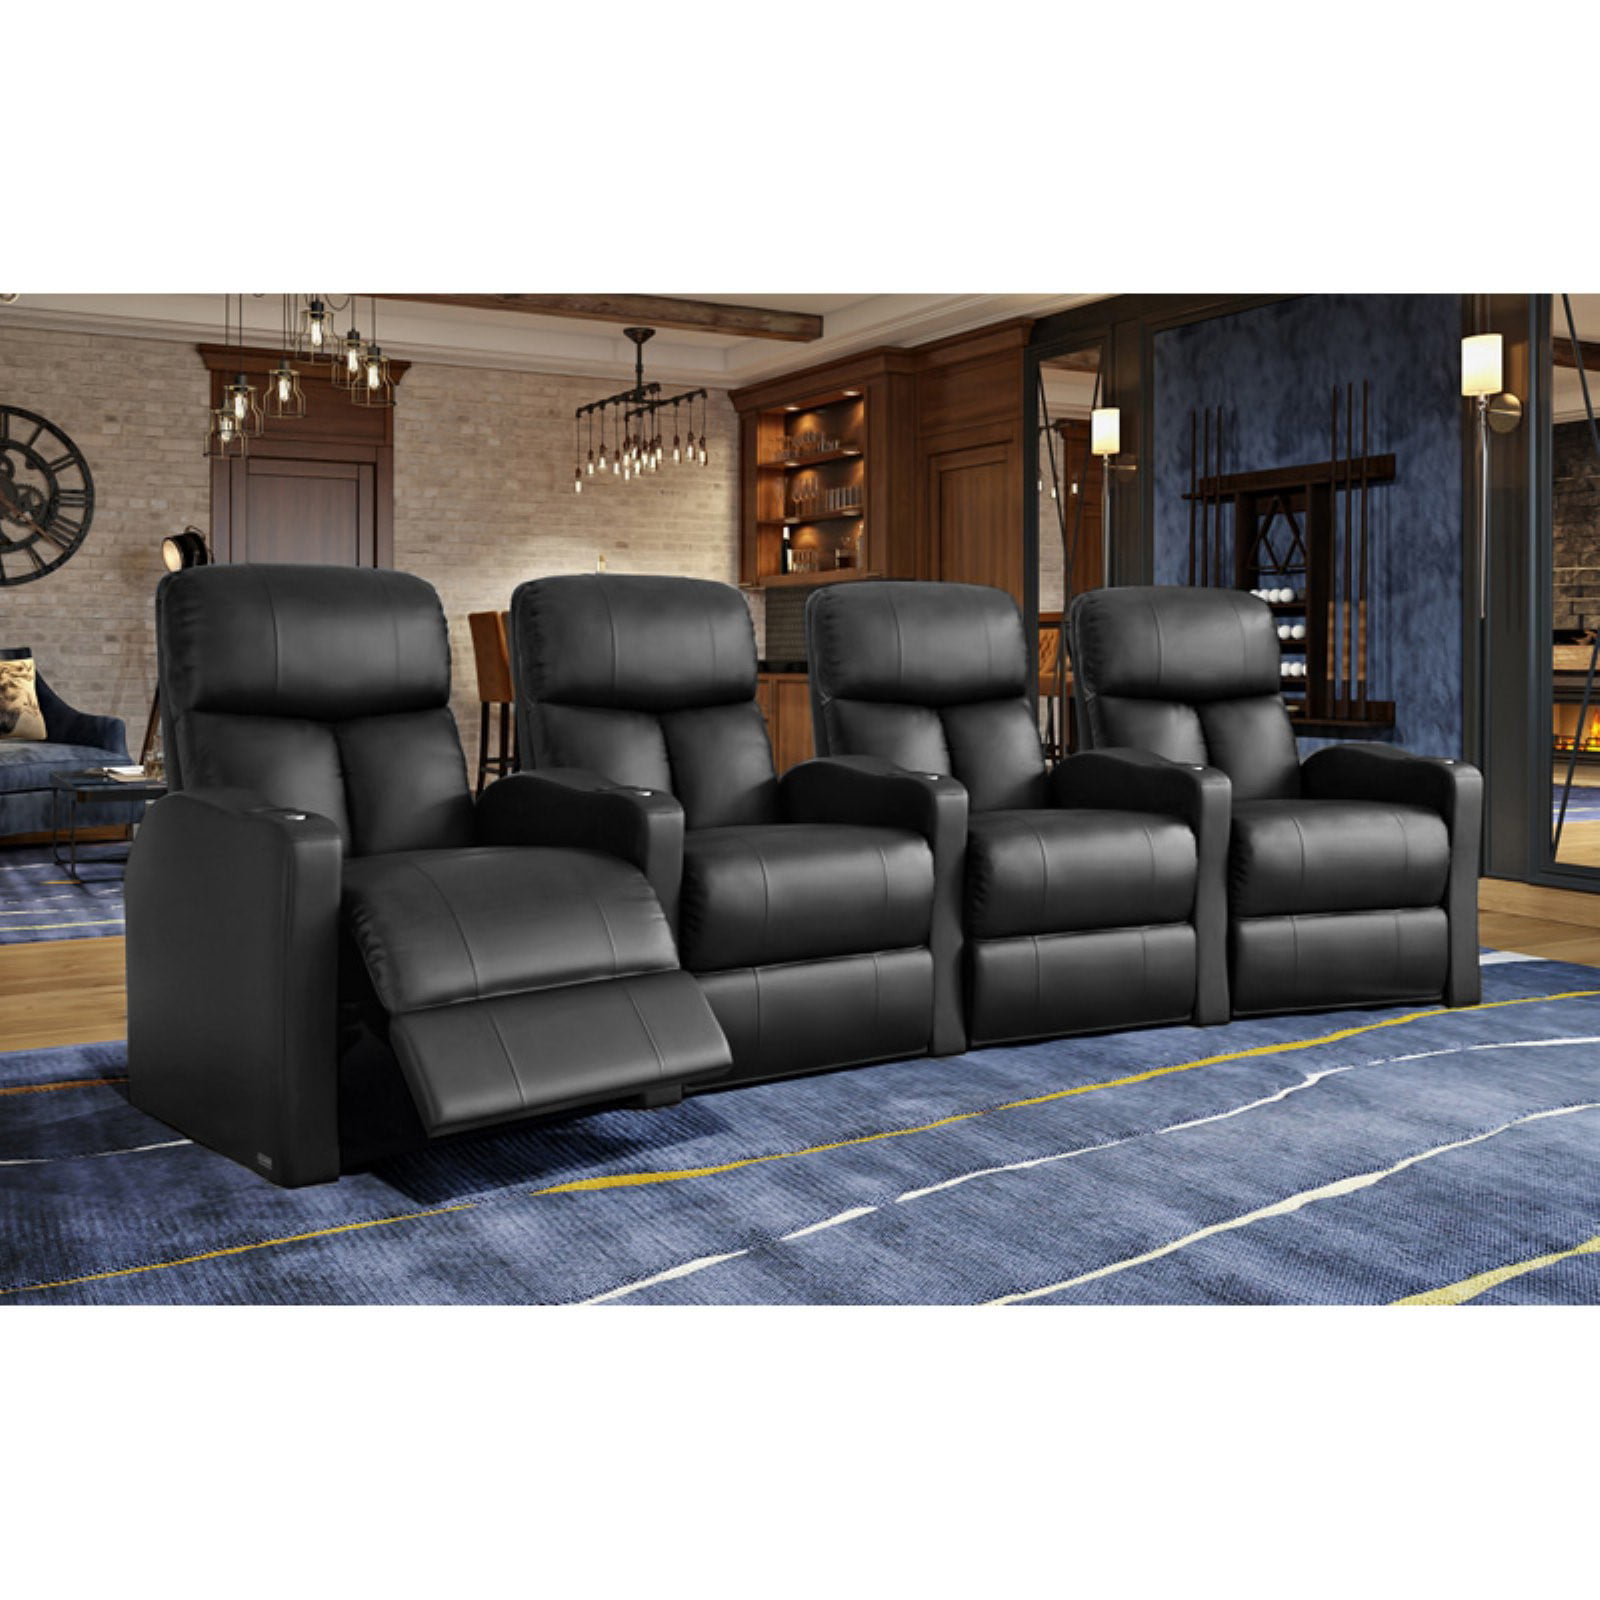 /& Black Swivel Tray Table Seating Bolt XS400 Leather Home Theater Recliner Set Row of 4